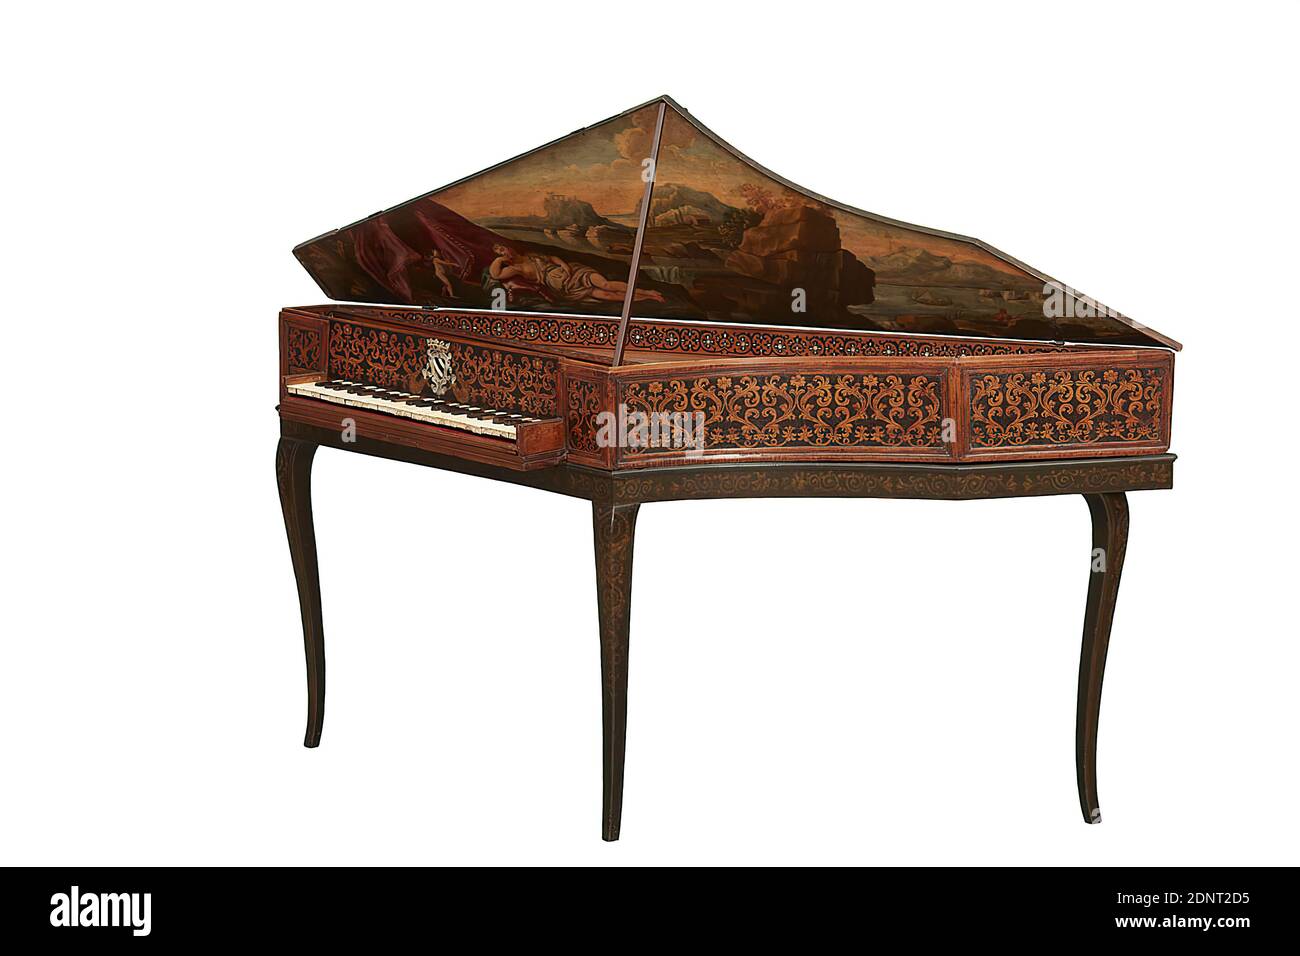 Domenico Cesare Borsari del Buonpetri, spinet, mother-of-pearl, ivory, horn, Total: length: 1610 mm (back); length: 909 mm (front); weight: 14 kg (instrument only); width: 490 mm, inscription: on the back of the endpapered board: D. Cesar Domini Sari q:m Petri sibi hoc fecit A.D. MDCXVIII, Venetiae, Keyboard Instruments, History of Ariadne, Baroque, The spinet with its triangular base in characteristic form is the second oldest surviving instrument of this type of construction. This type became famous in the 17th century. Stock Photo